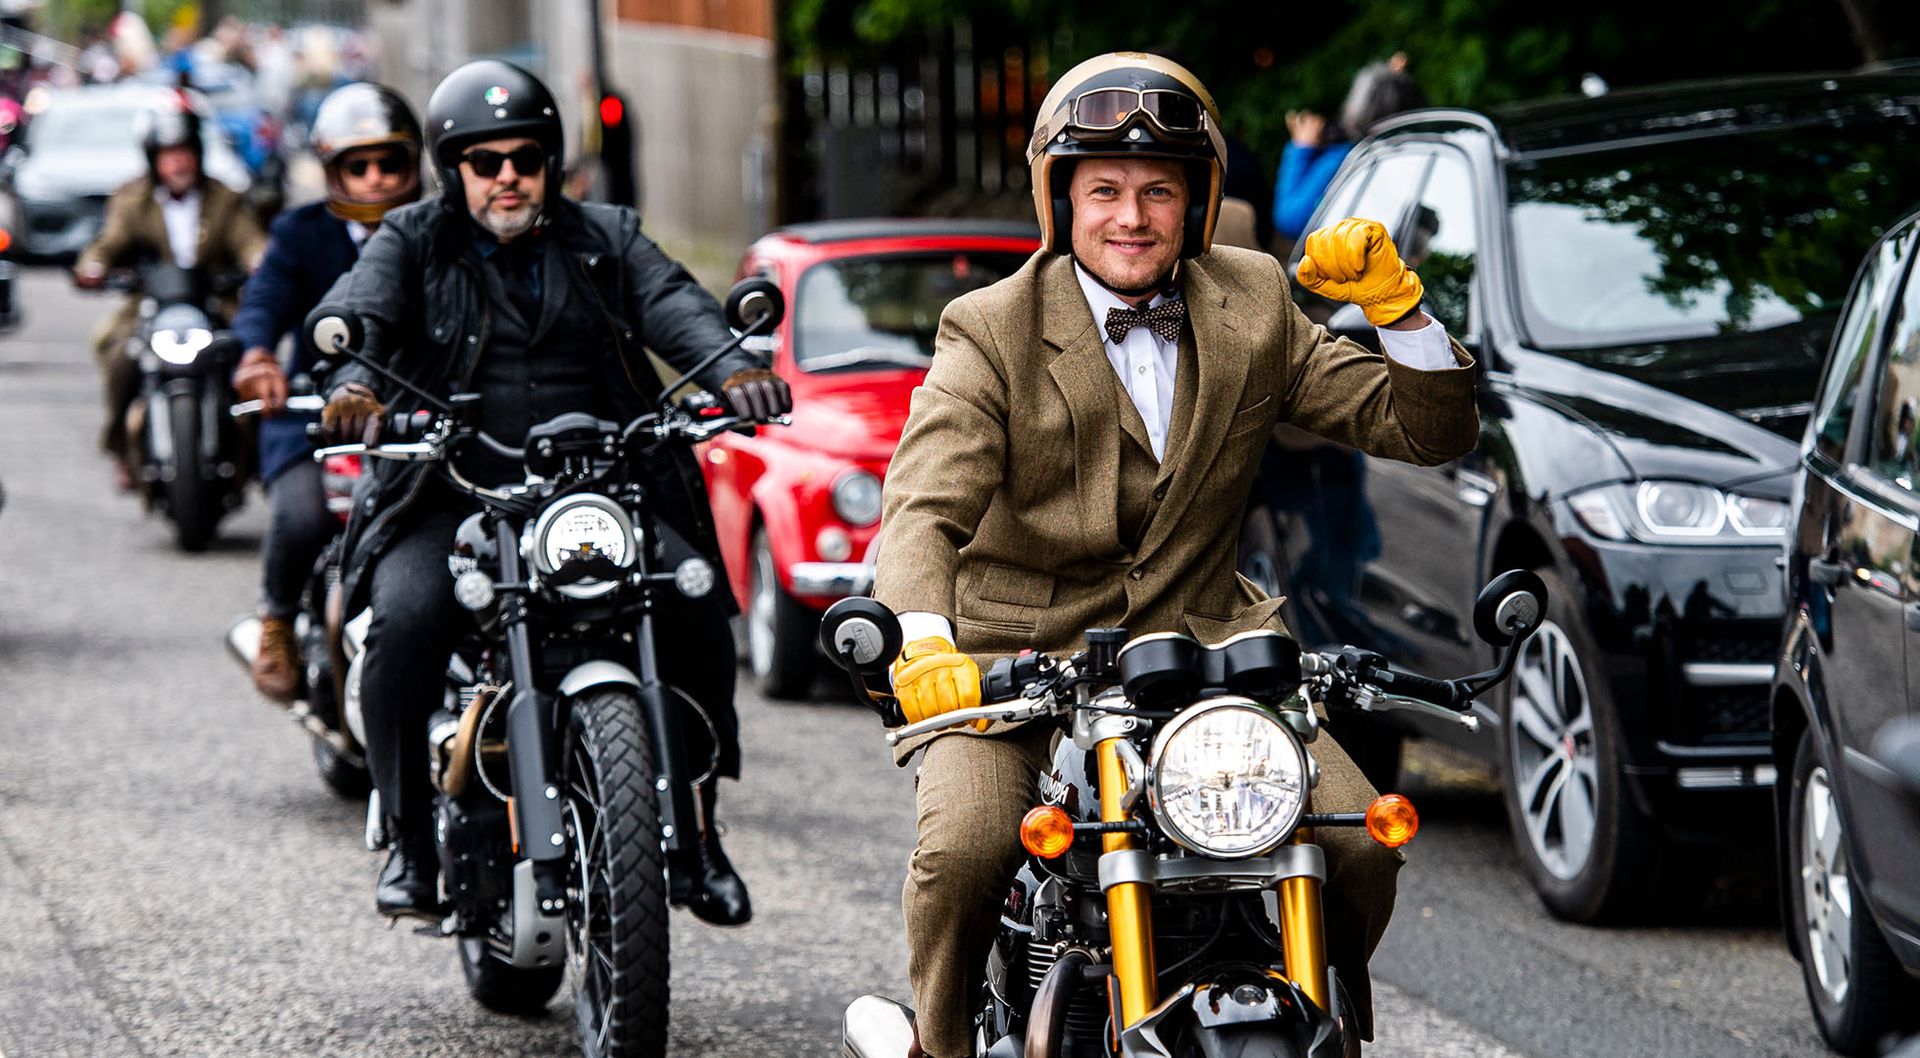 Finely dressed motorcycle riders riding for The Distinguished Gentleman's Ride.